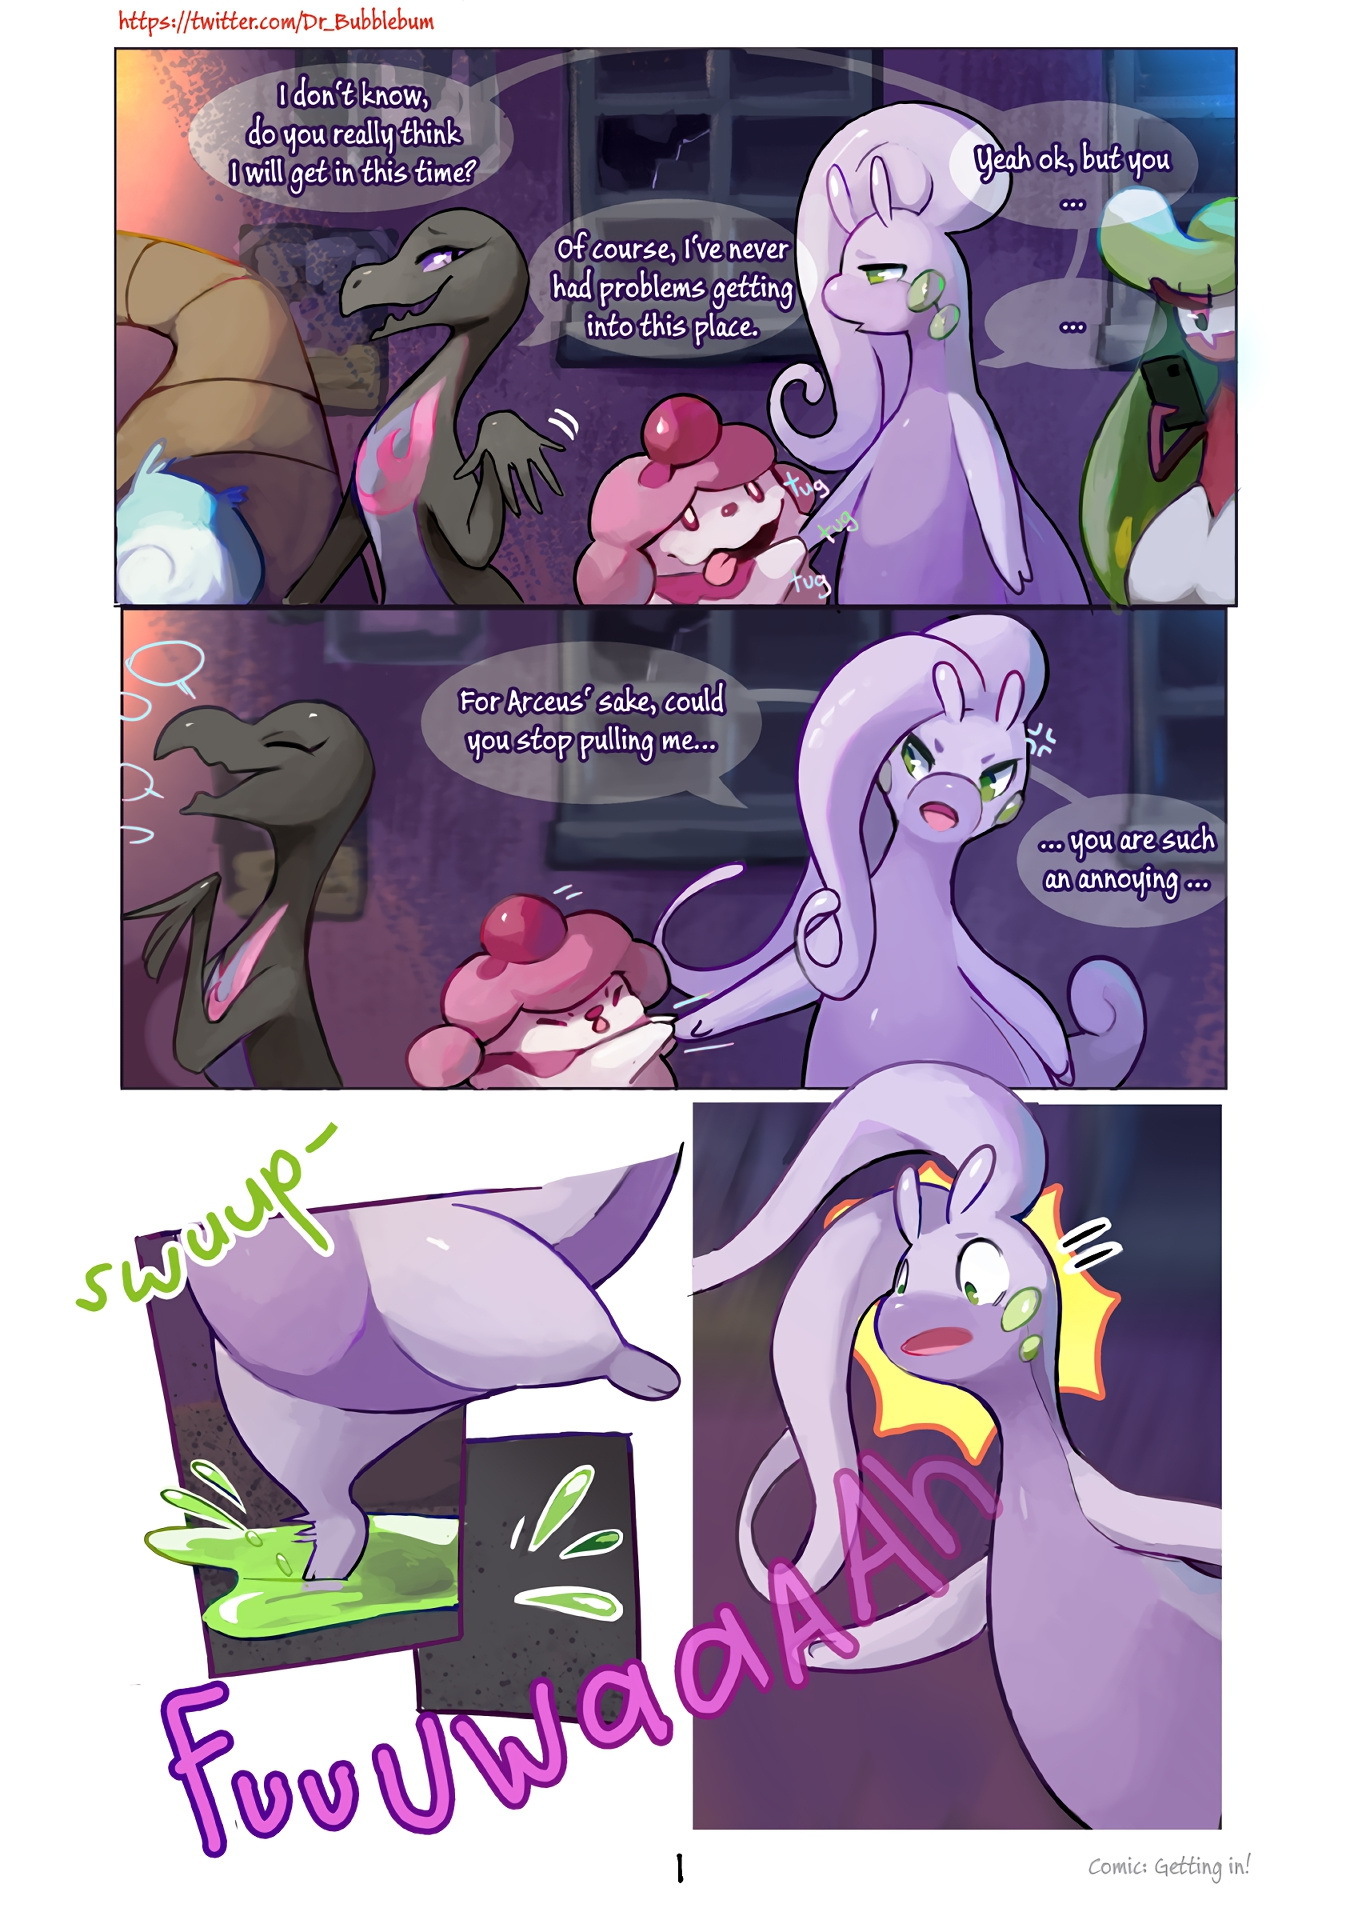 Getting in! - Page 1